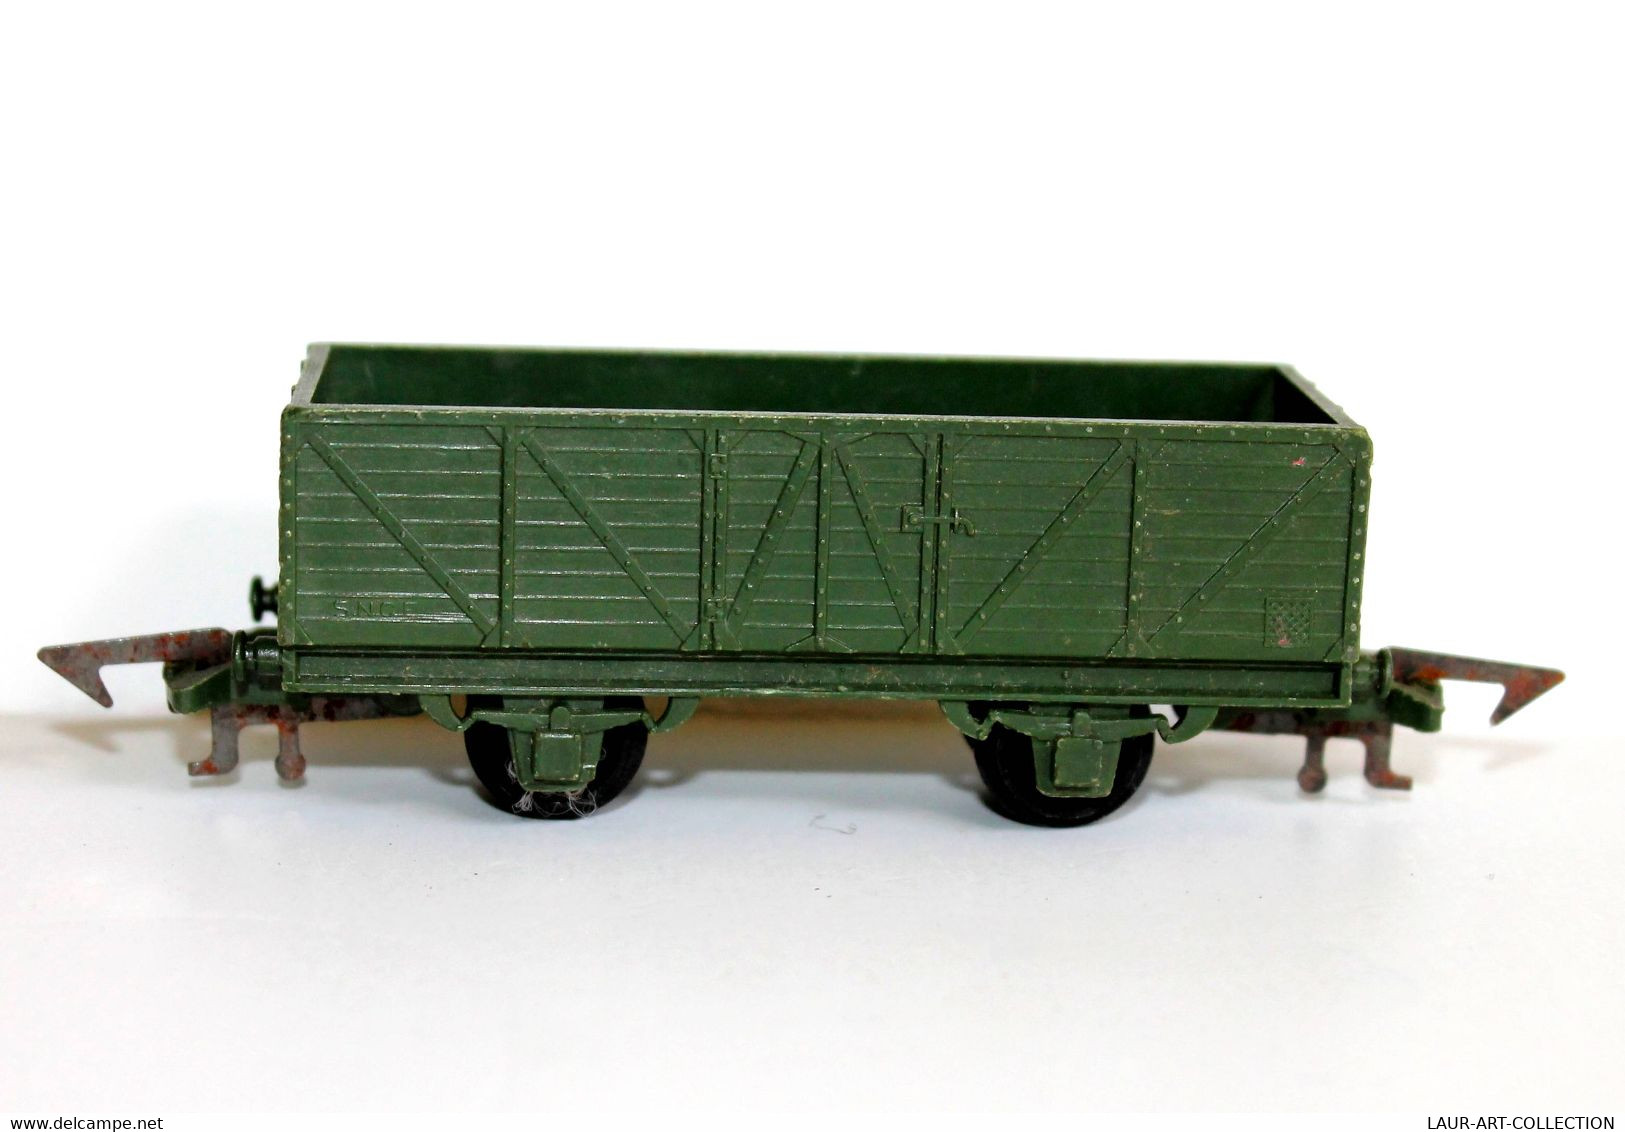 JOUEF - WAGON MARCHANDISE / TOMBEREAU - A ESSIEUX - HO - SNCF - VERT - MINIATURE FERROVIAIRE TRAIN (2105.117) - Goods Waggons (wagons)